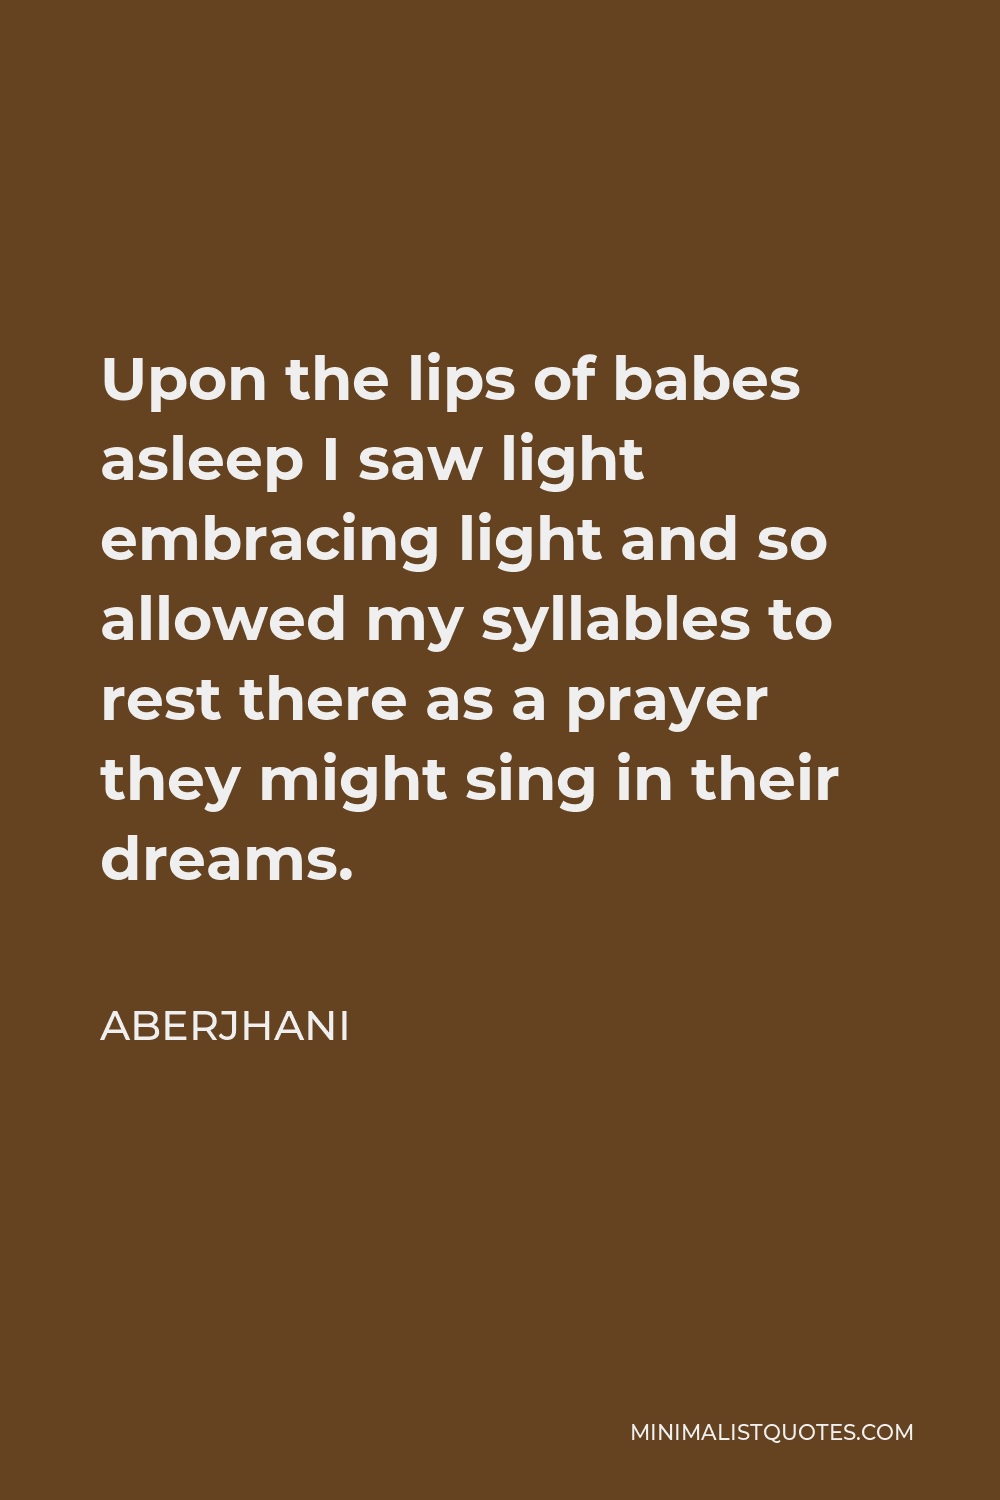 Aberjhani Quote - Upon the lips of babes asleep I saw light embracing light and so allowed my syllables to rest there as a prayer they might sing in their dreams.